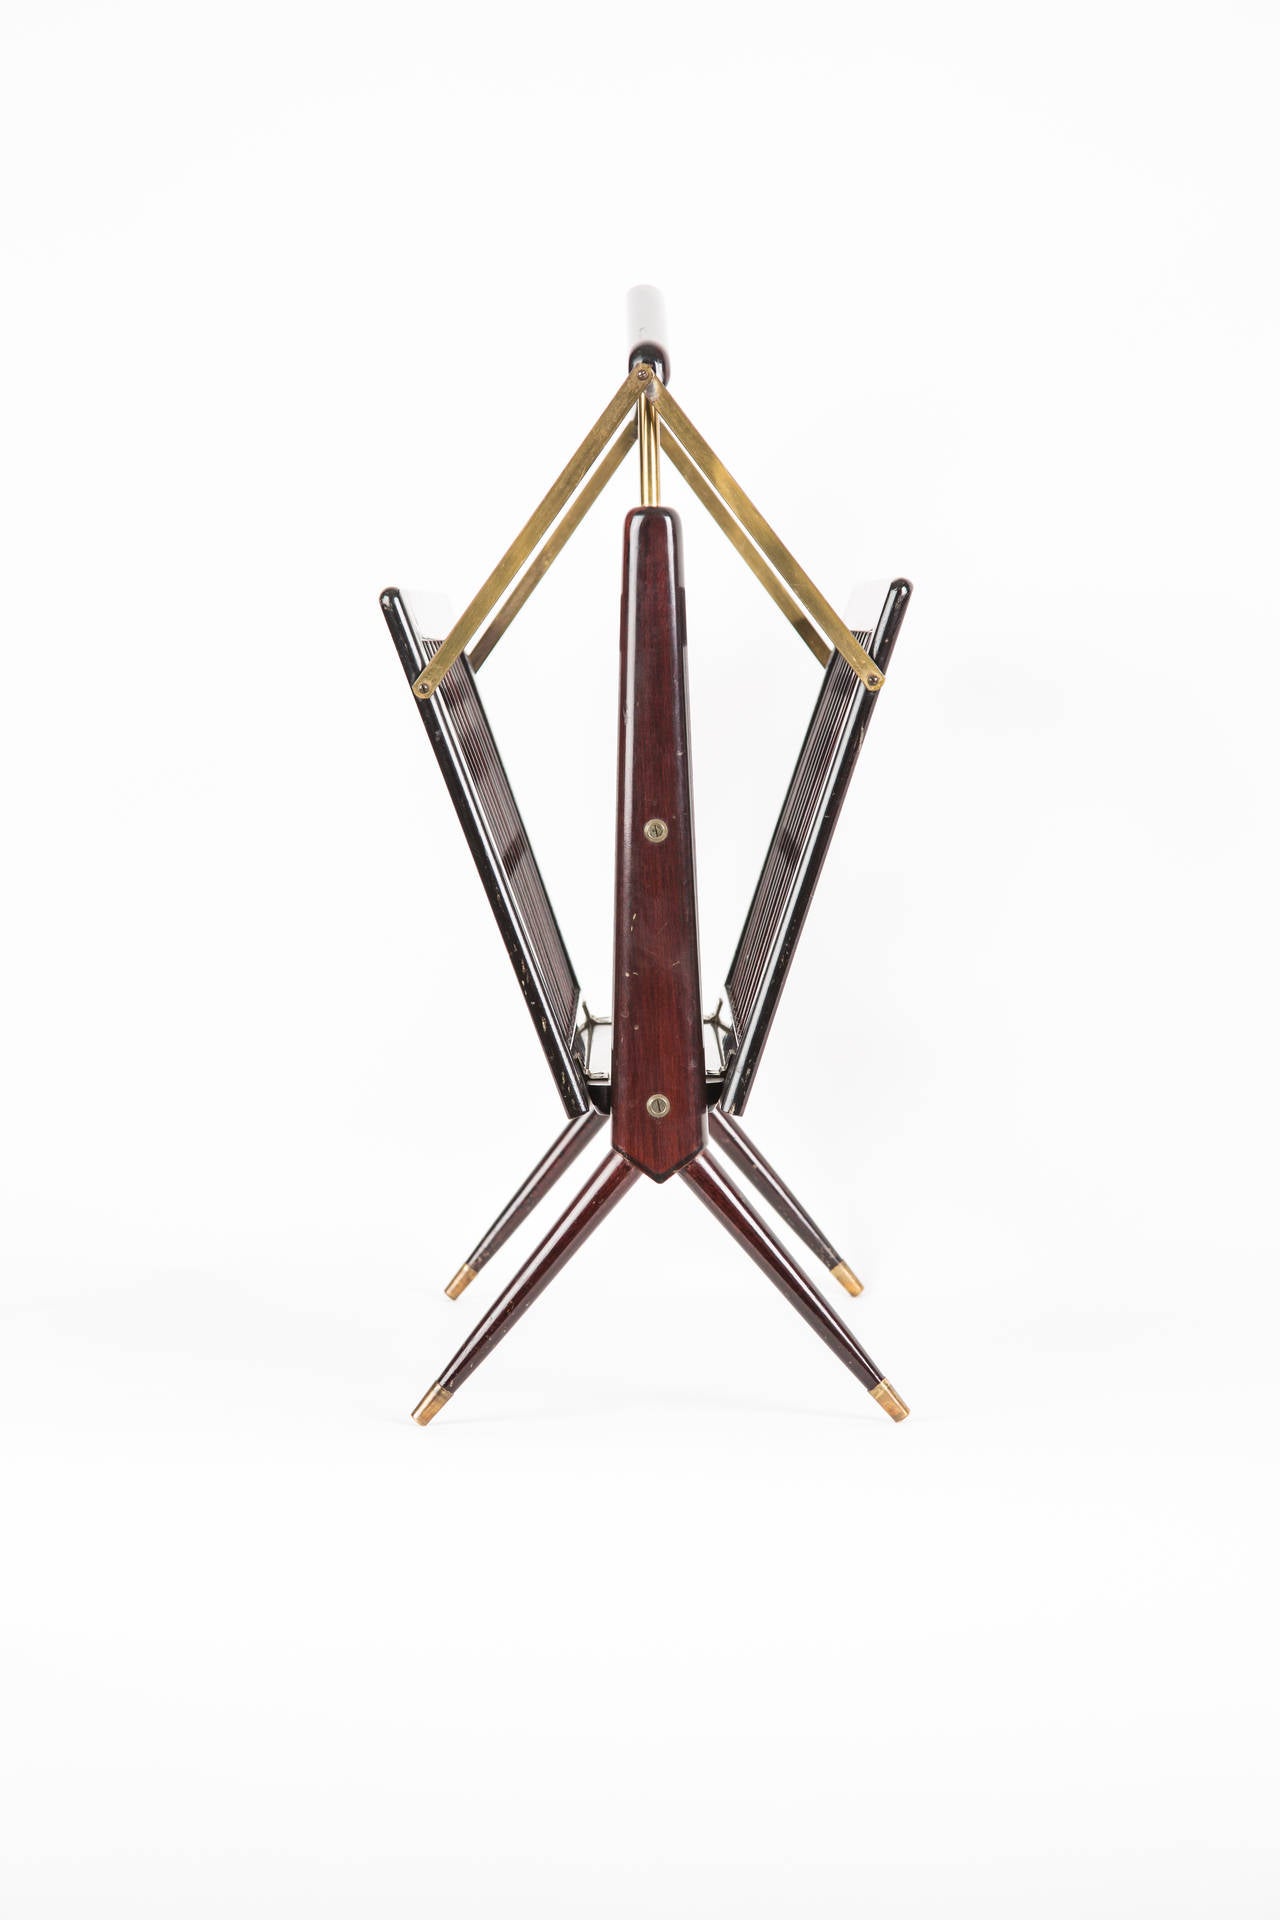 Art Nouveau Warm tropical wood Foldable Magazine Stand  in Gio Ponti Style